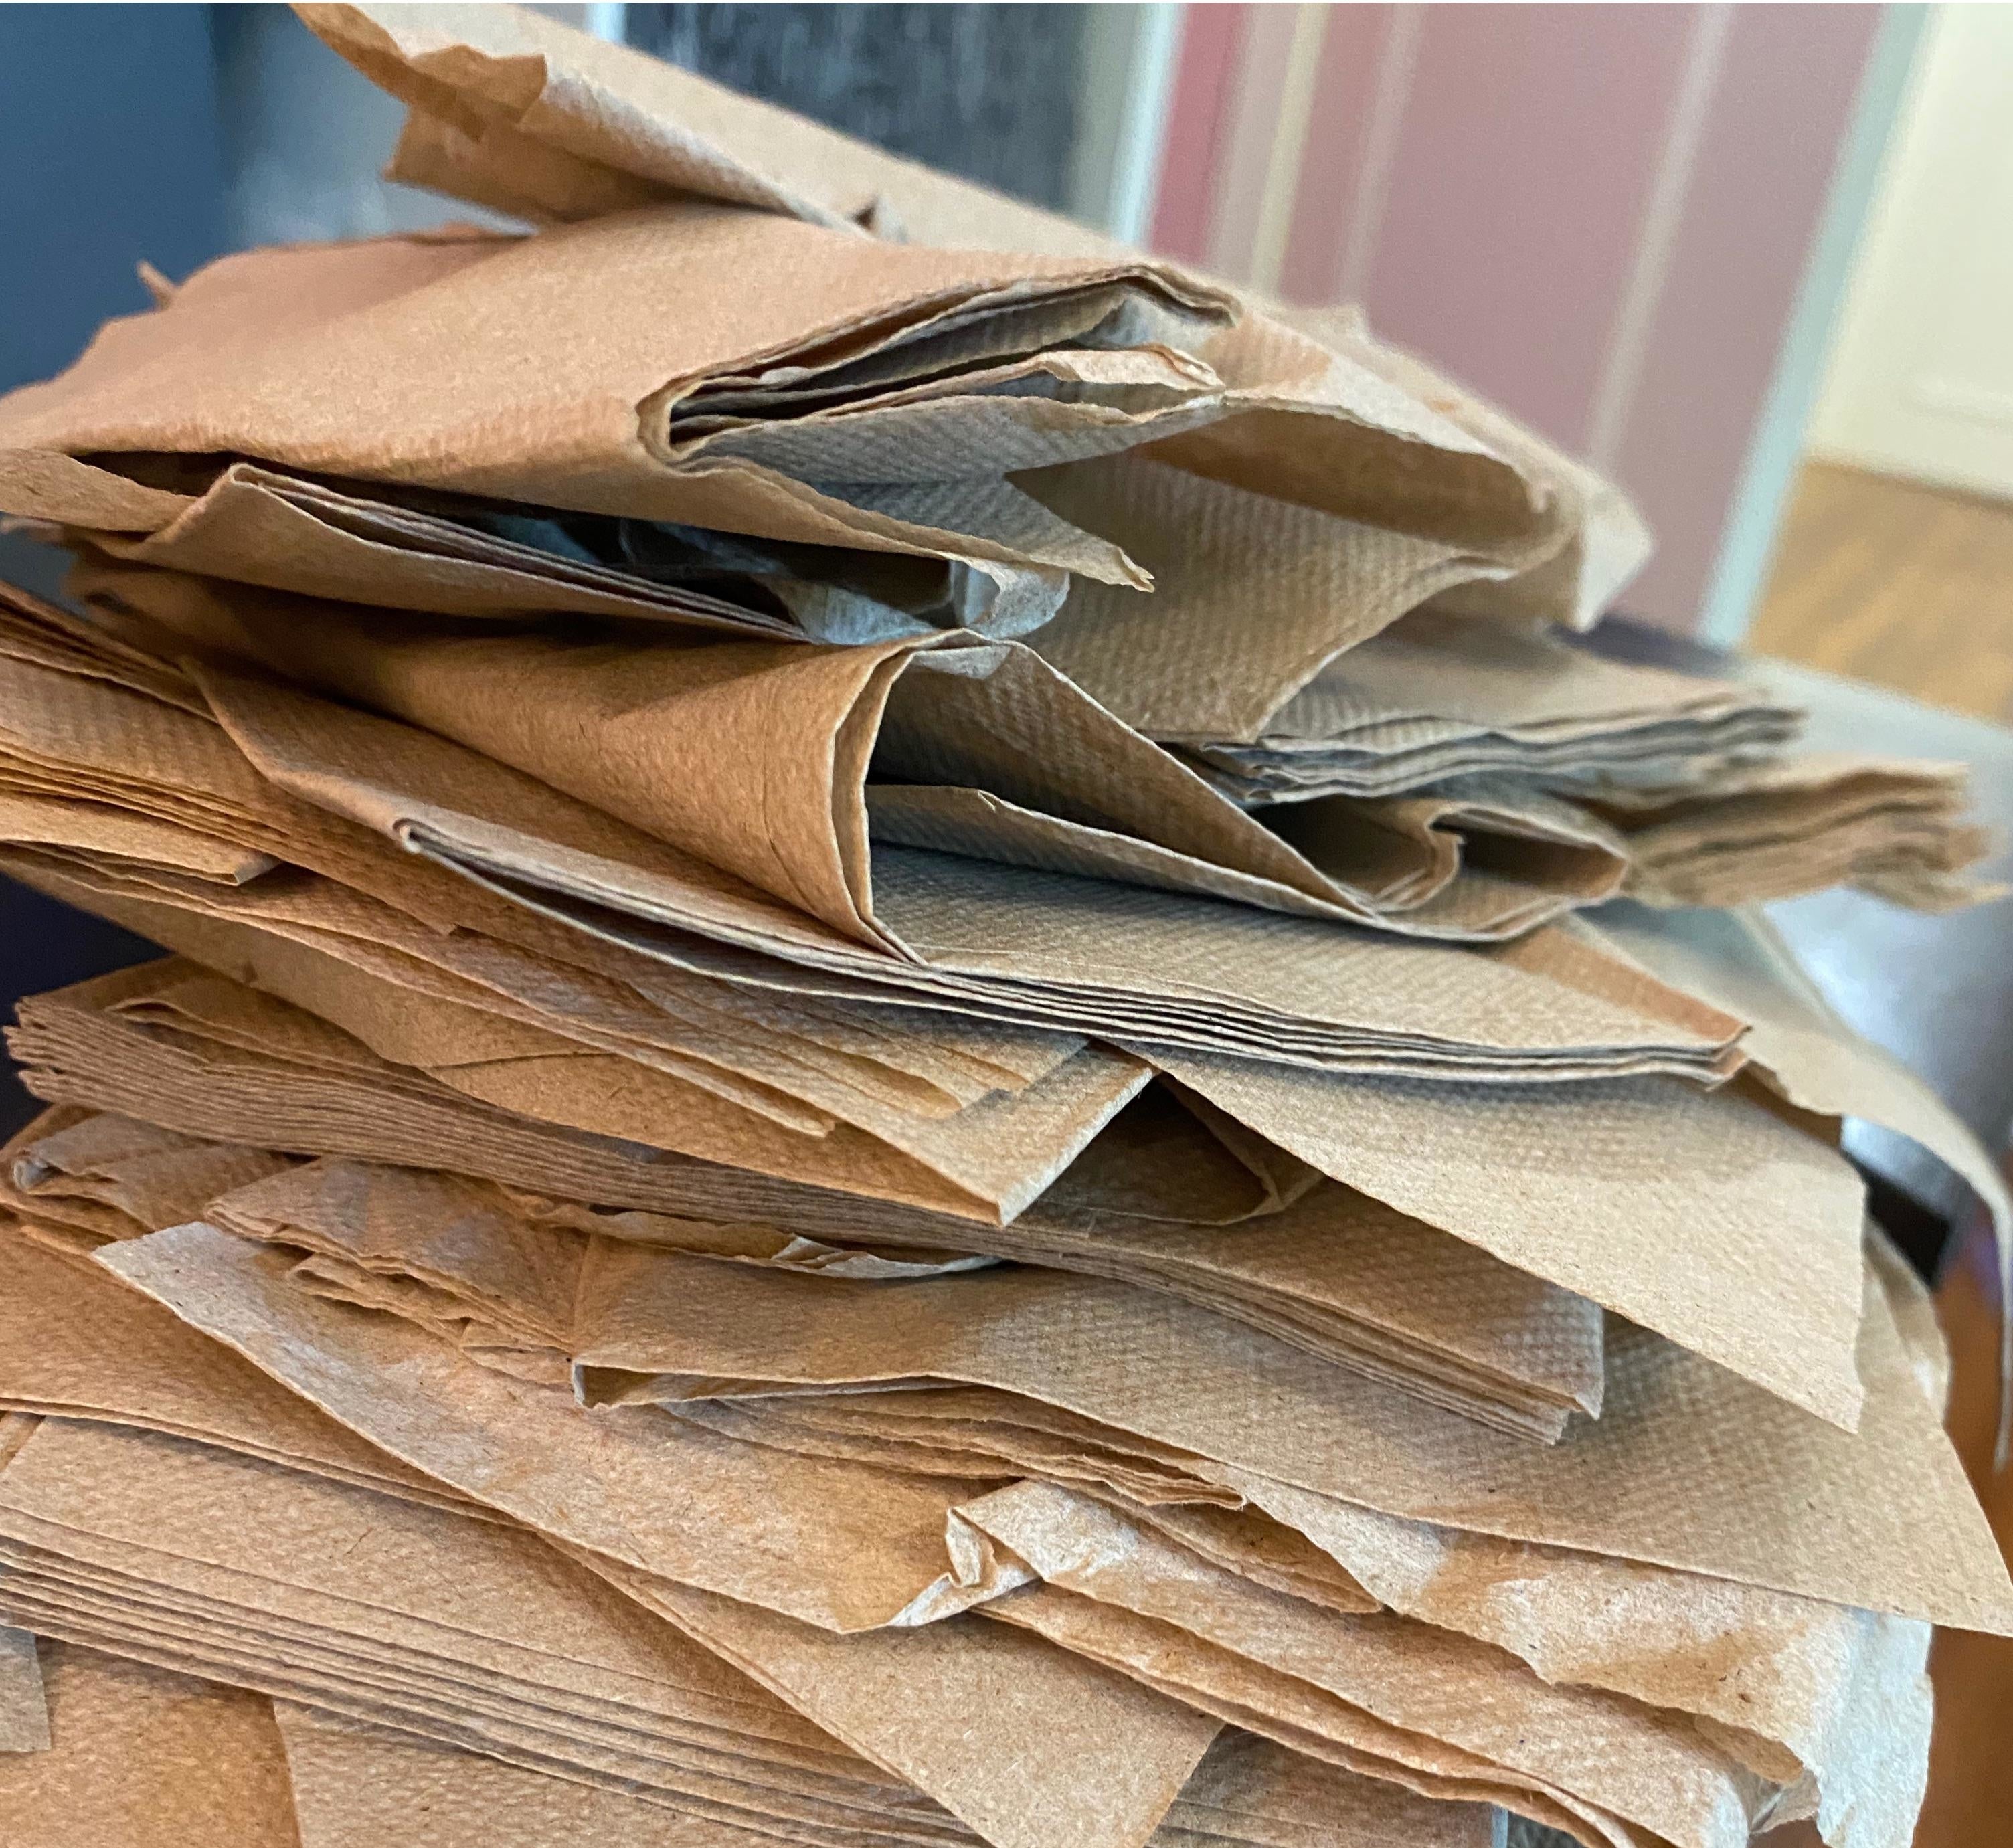 A stack of brown paper napkins on a wooden table